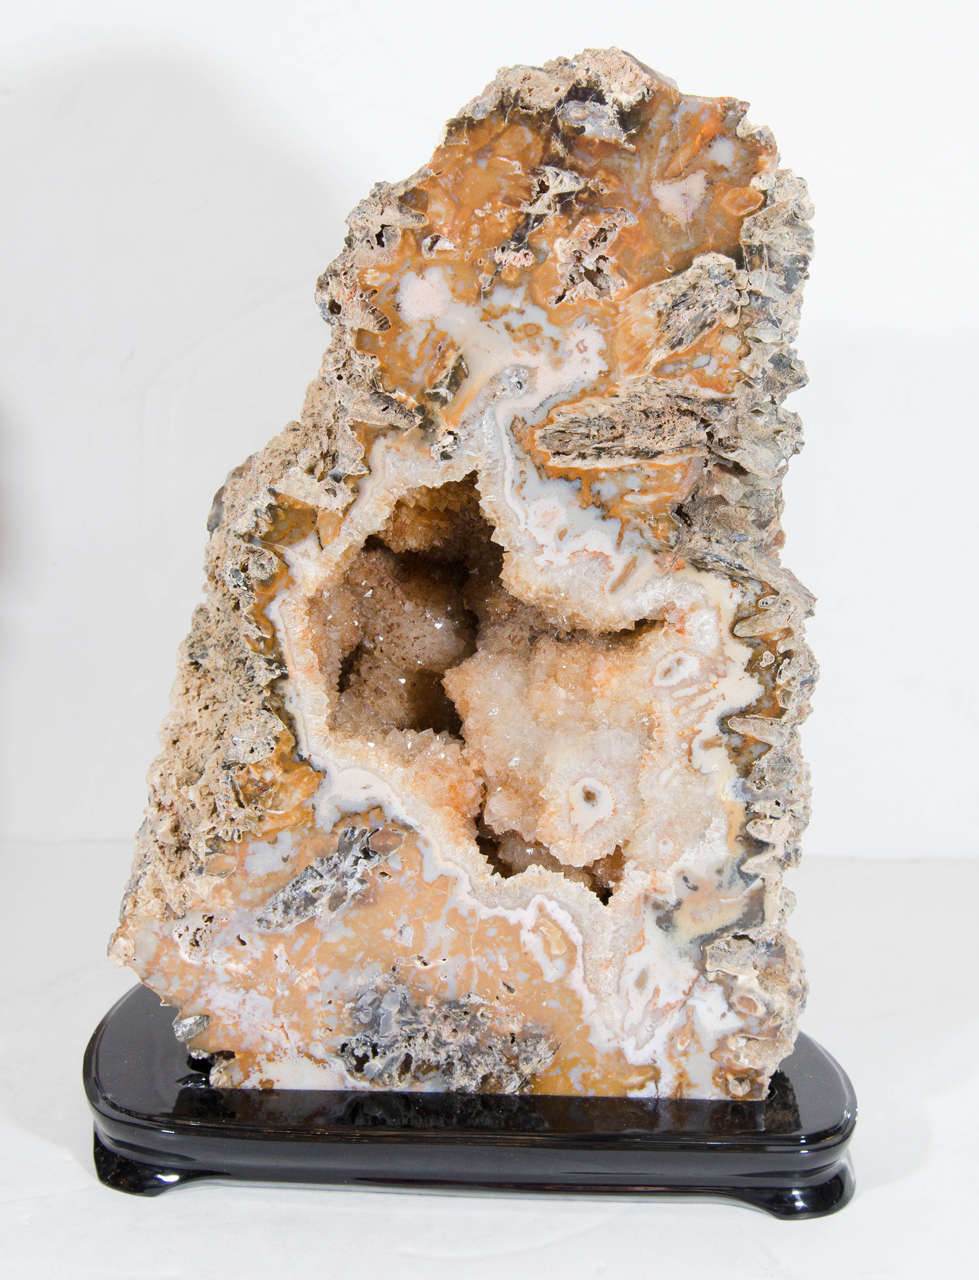 This stunning rock specimen features citrine crystals in shades of pearl, umber, and grey.  With it's beautiful structure and ebonized walnut base, it is a unique decorative accent and would look magniifcent in any room or decor.